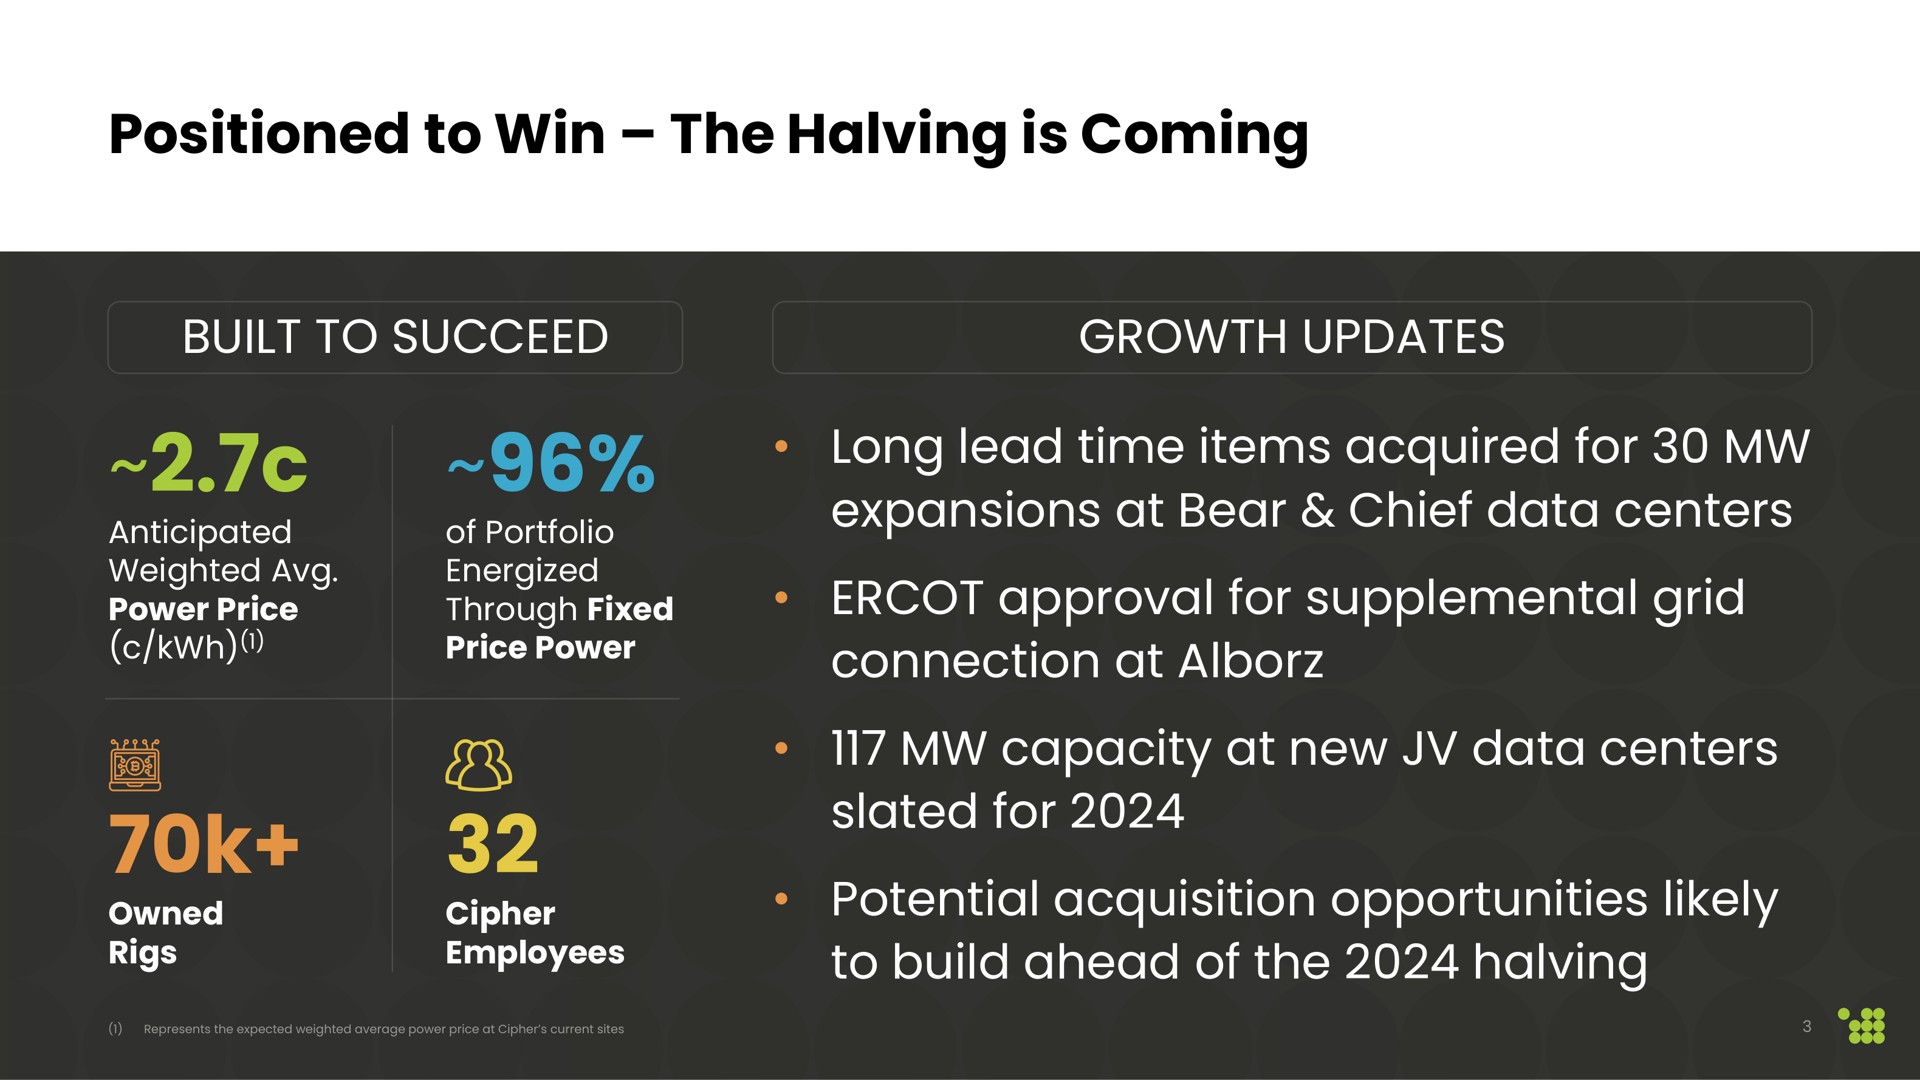 positioned to win the halving is coming built to succeed growth updates long lead time items acquired for expansions at bear chief data centers approval for supplemental grid connection at capacity at new data centers slated for potential acquisition opportunities likely to build ahead of the halving nee seat gene a pariah sear price power employees | Cipher Mining